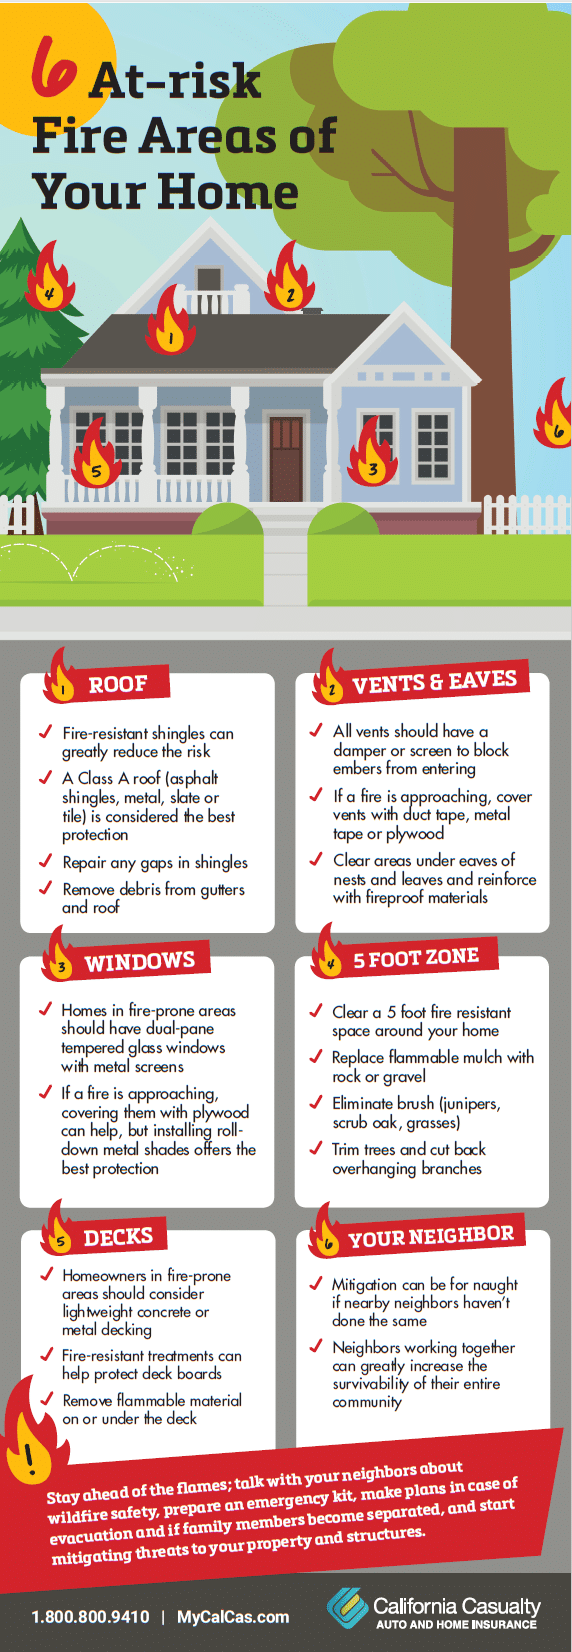 At Risk Fire Areas in Your Home - Infographic